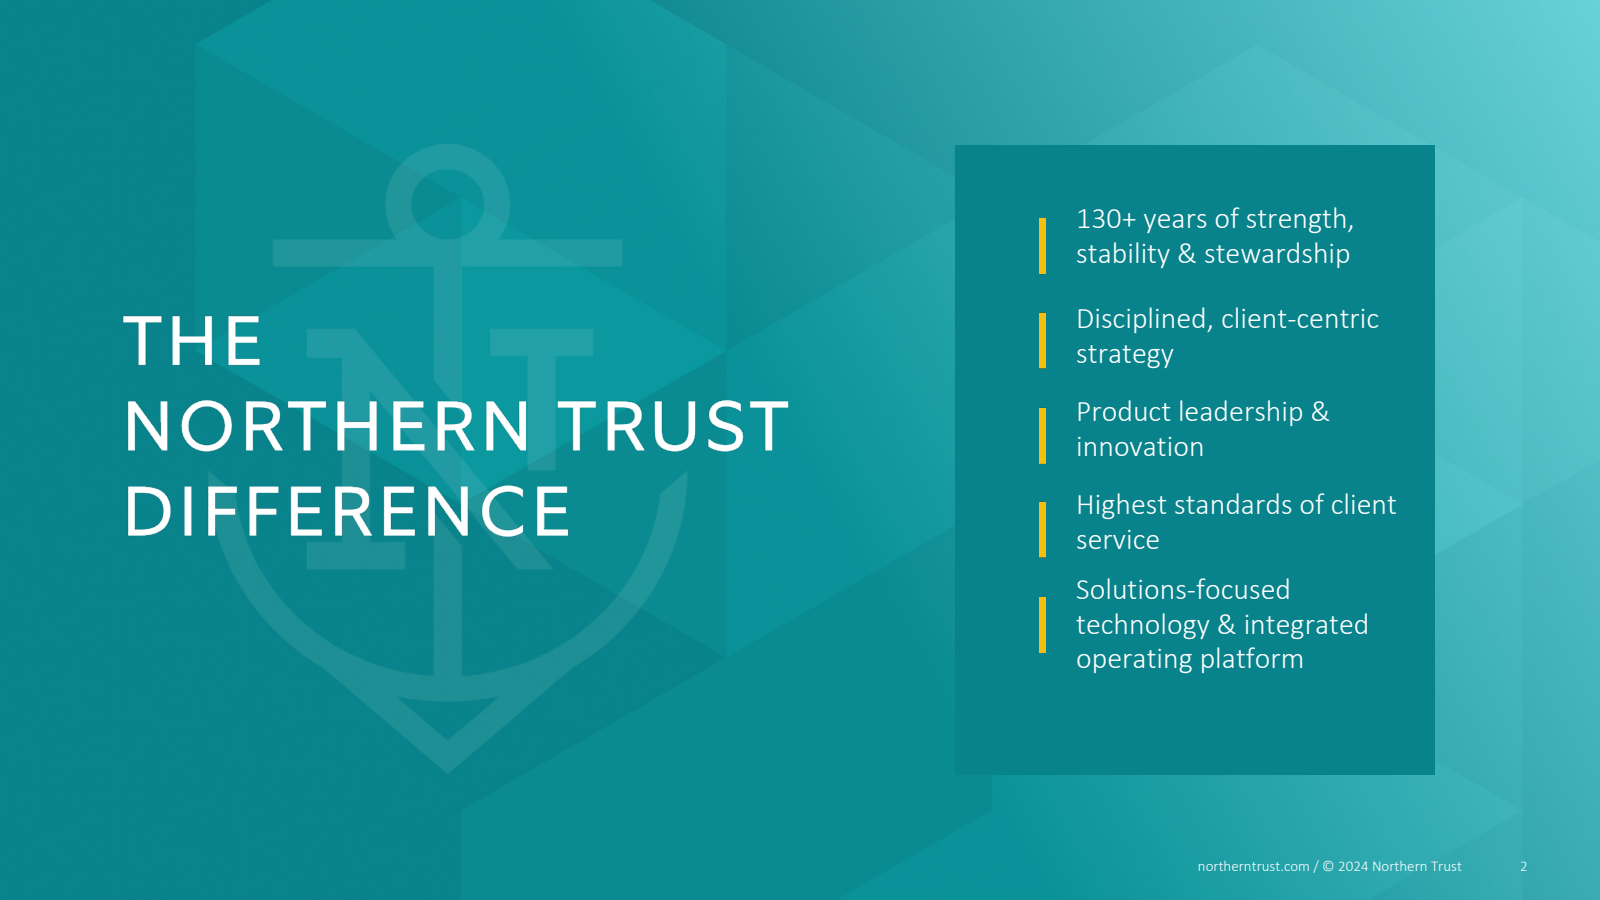 THE 

NORTHERN TRUST